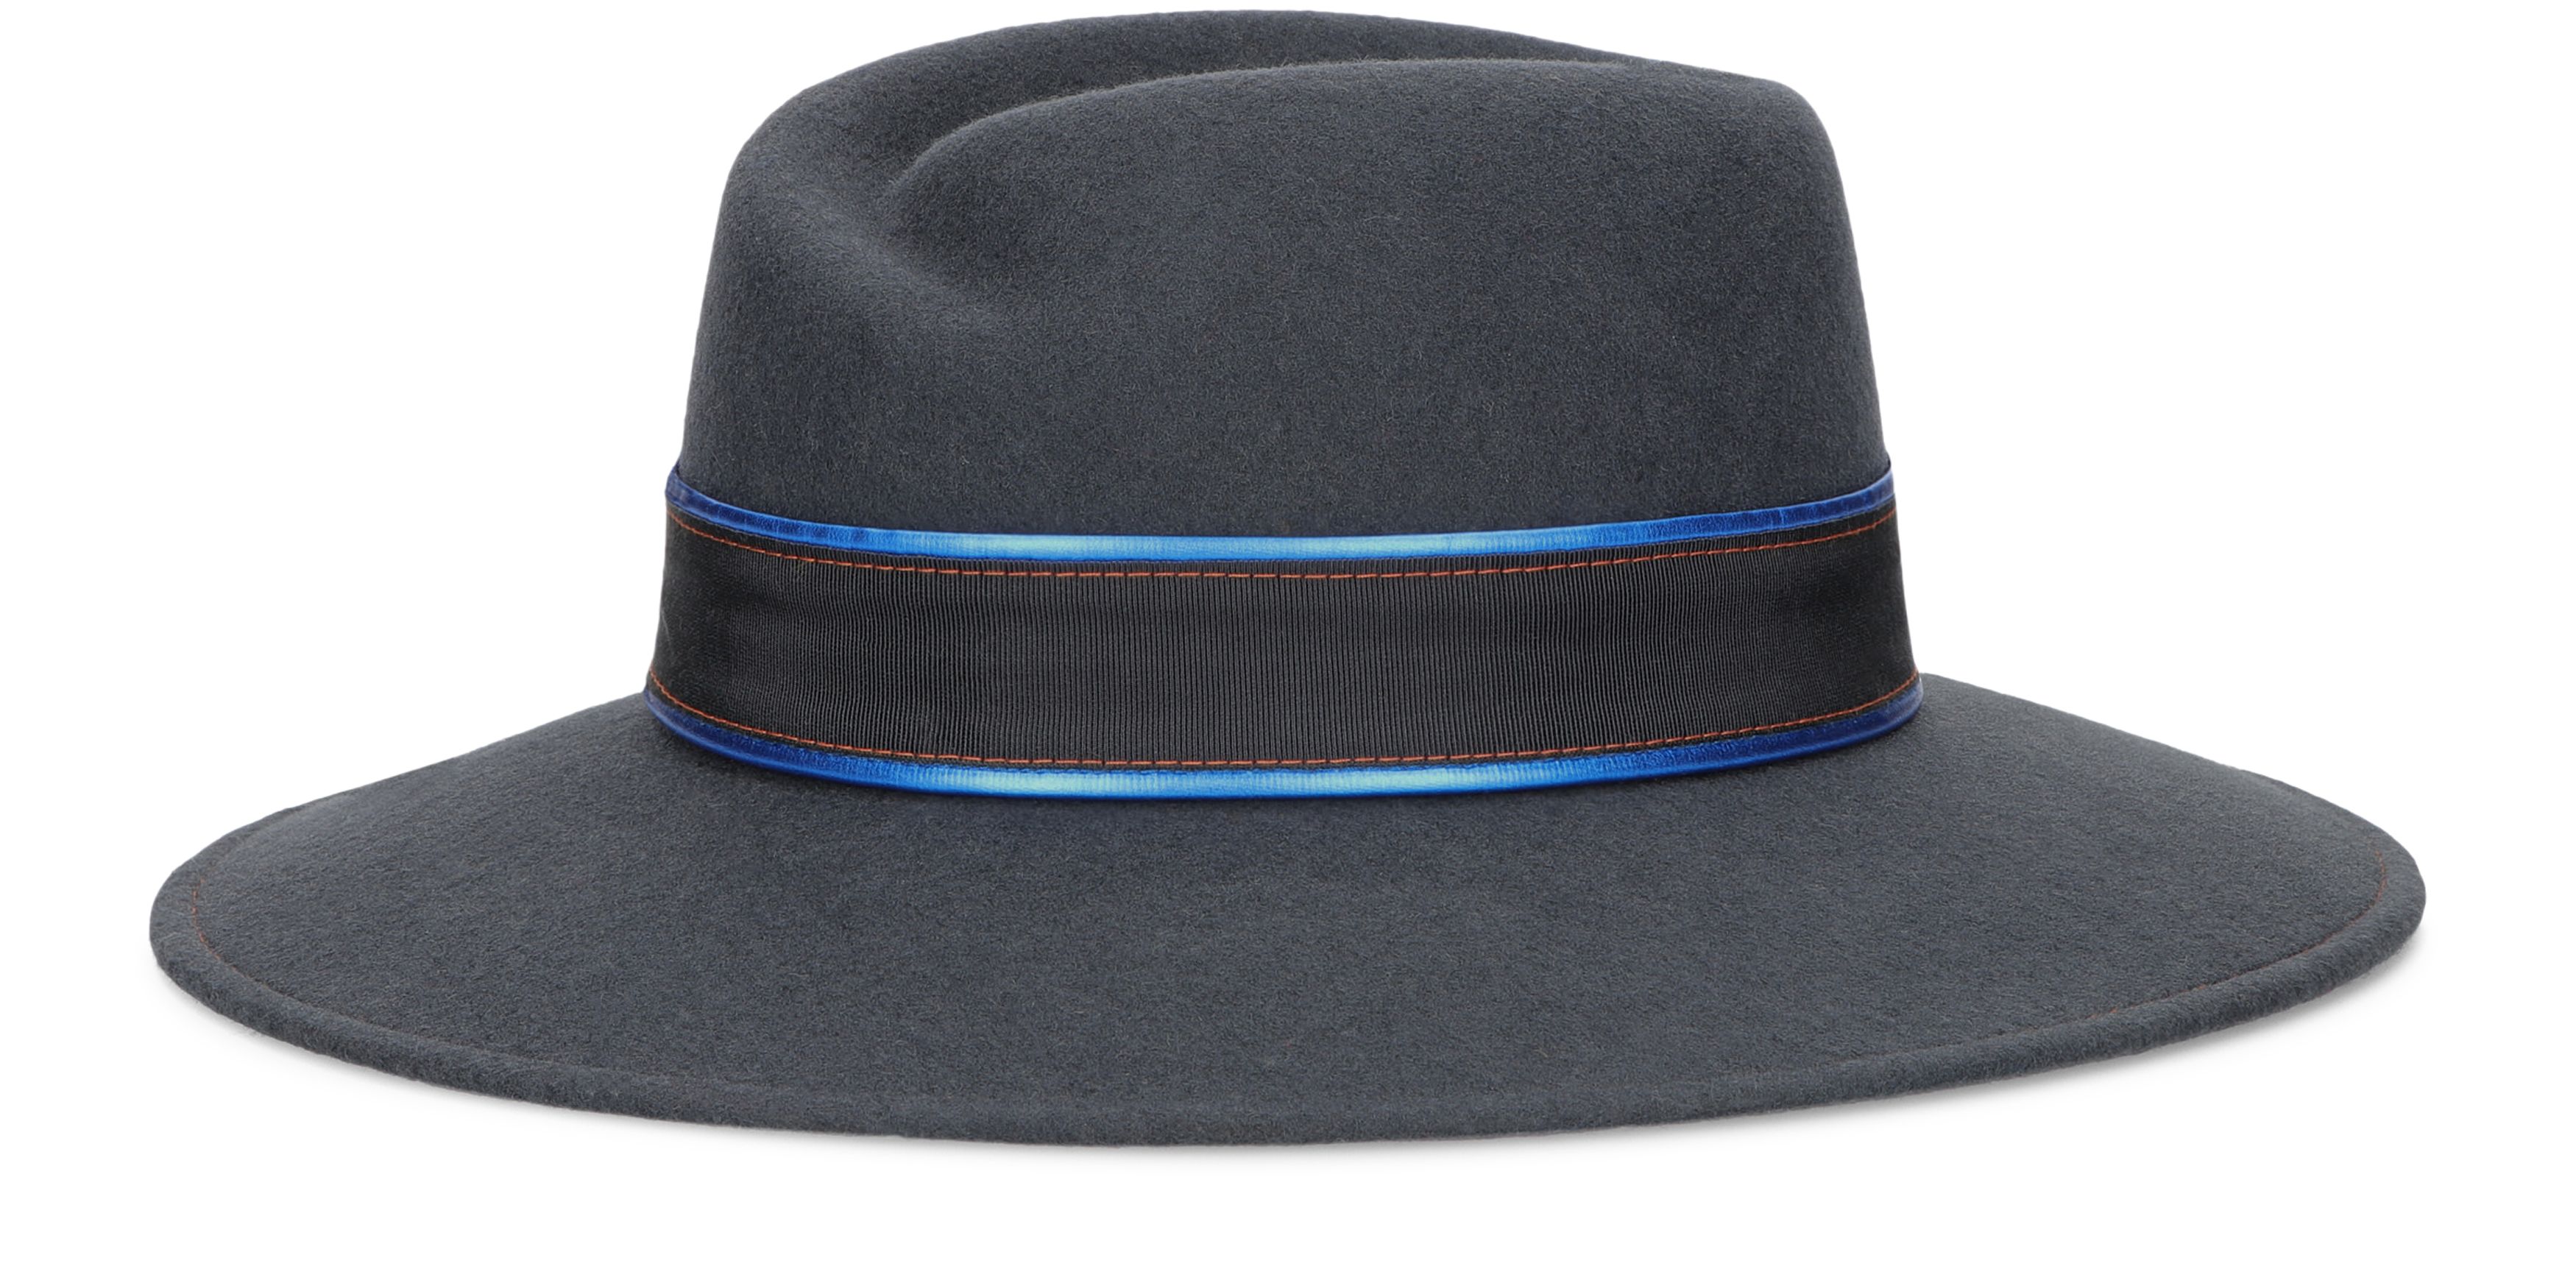 Borsalino Romy wool felt with grosgrain and eco-leather trim hat band